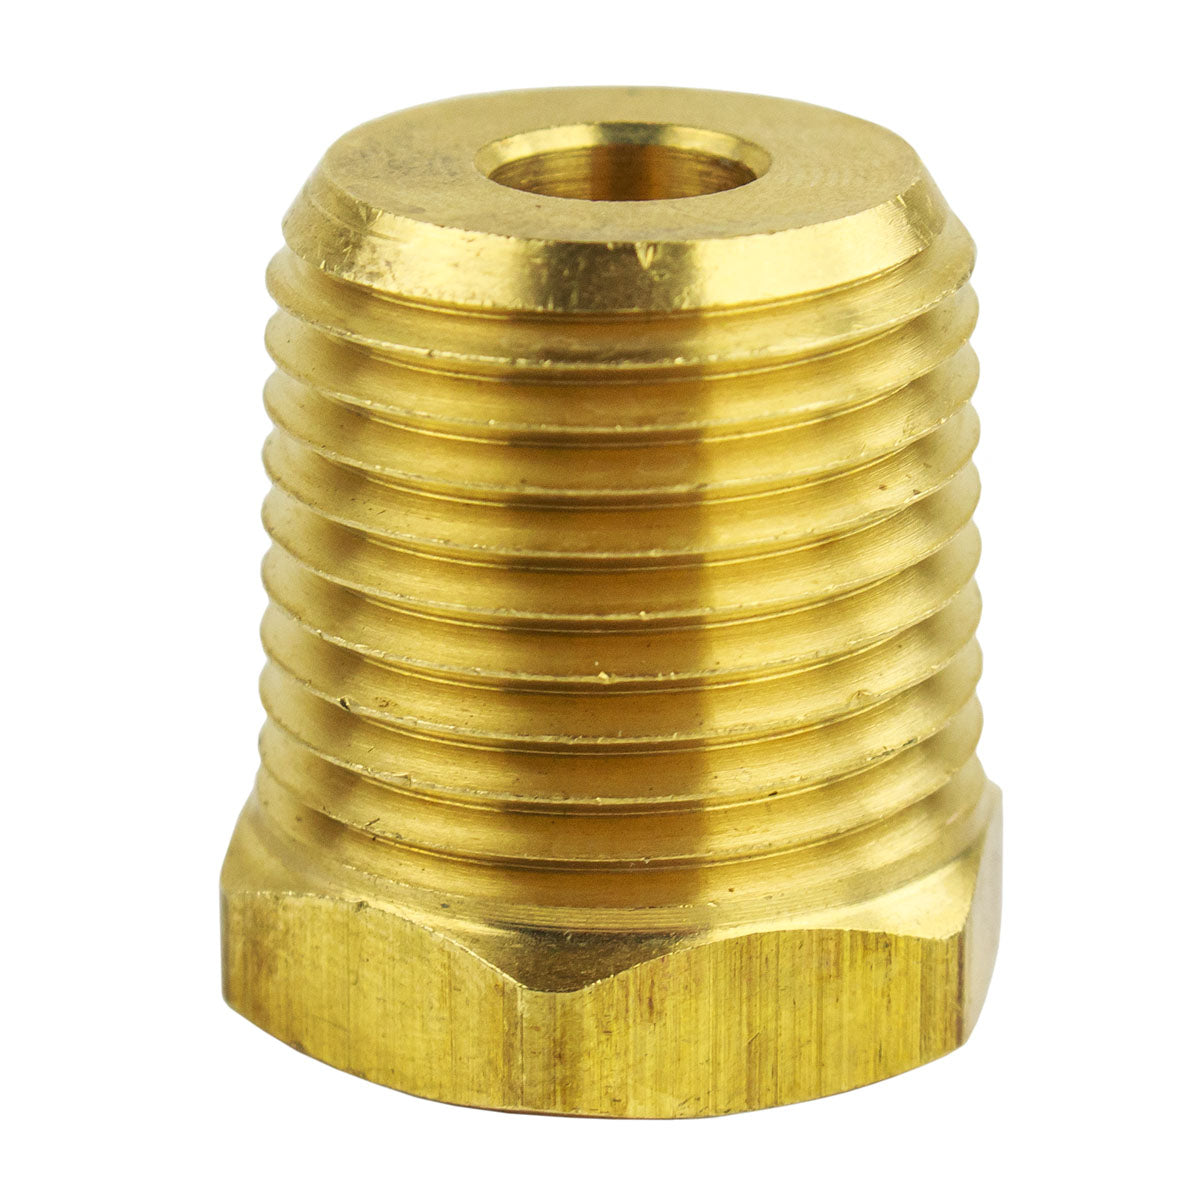 1/2" MNPT x 1/4" FNPT Solid Brass Bushing Reducer Fitting Reducing Adapter